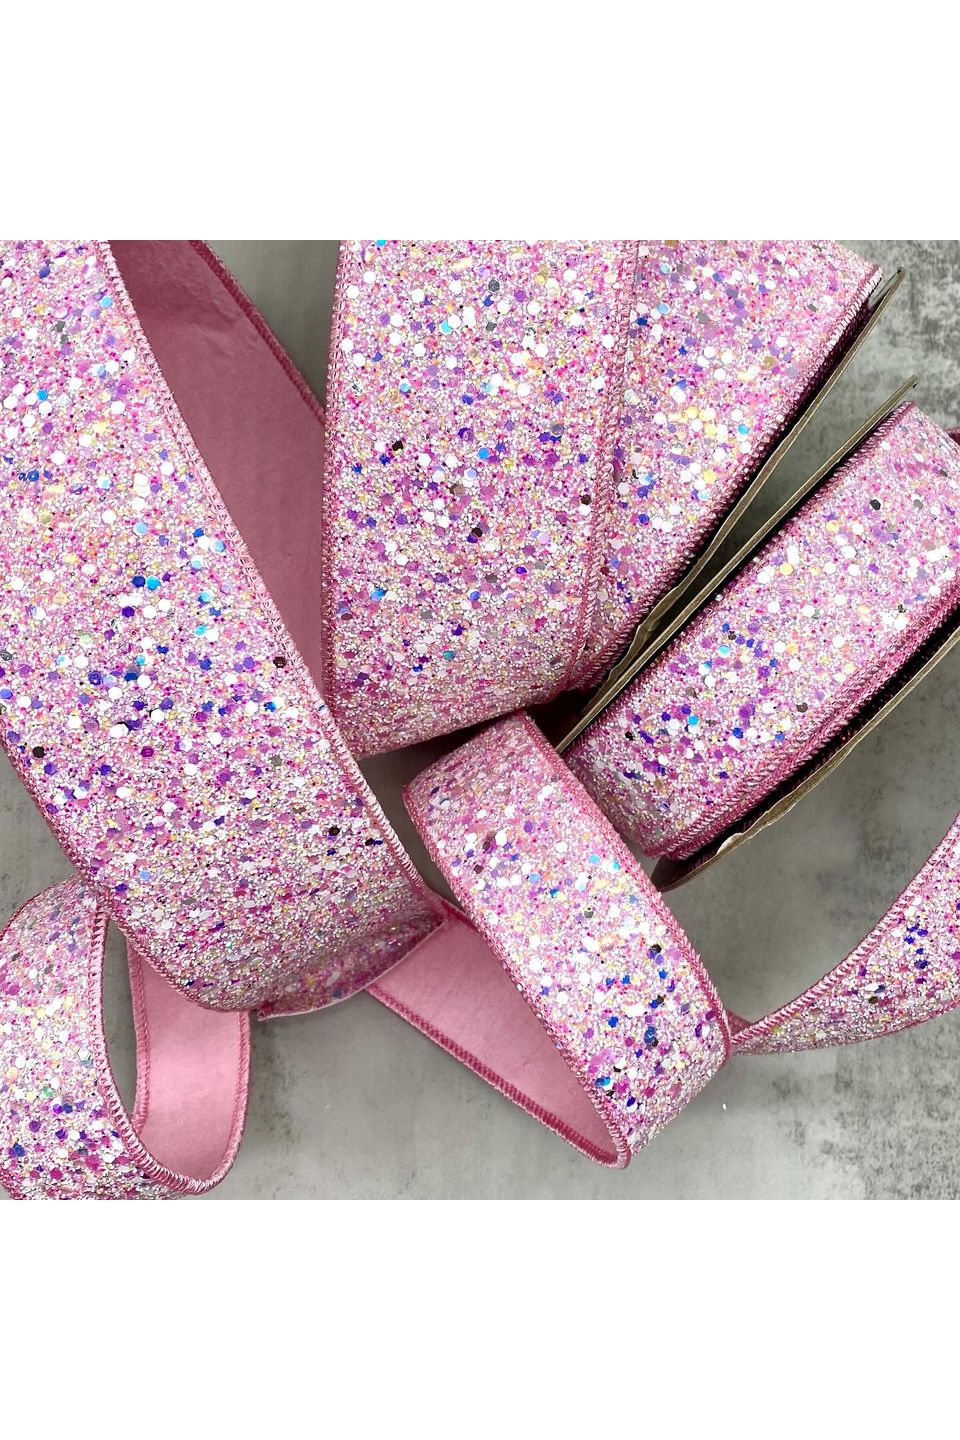 Shop For 1.5" Sugar Plum Glitter Ribbon: Cotton Candy Pink (10 Yards) 18-4372